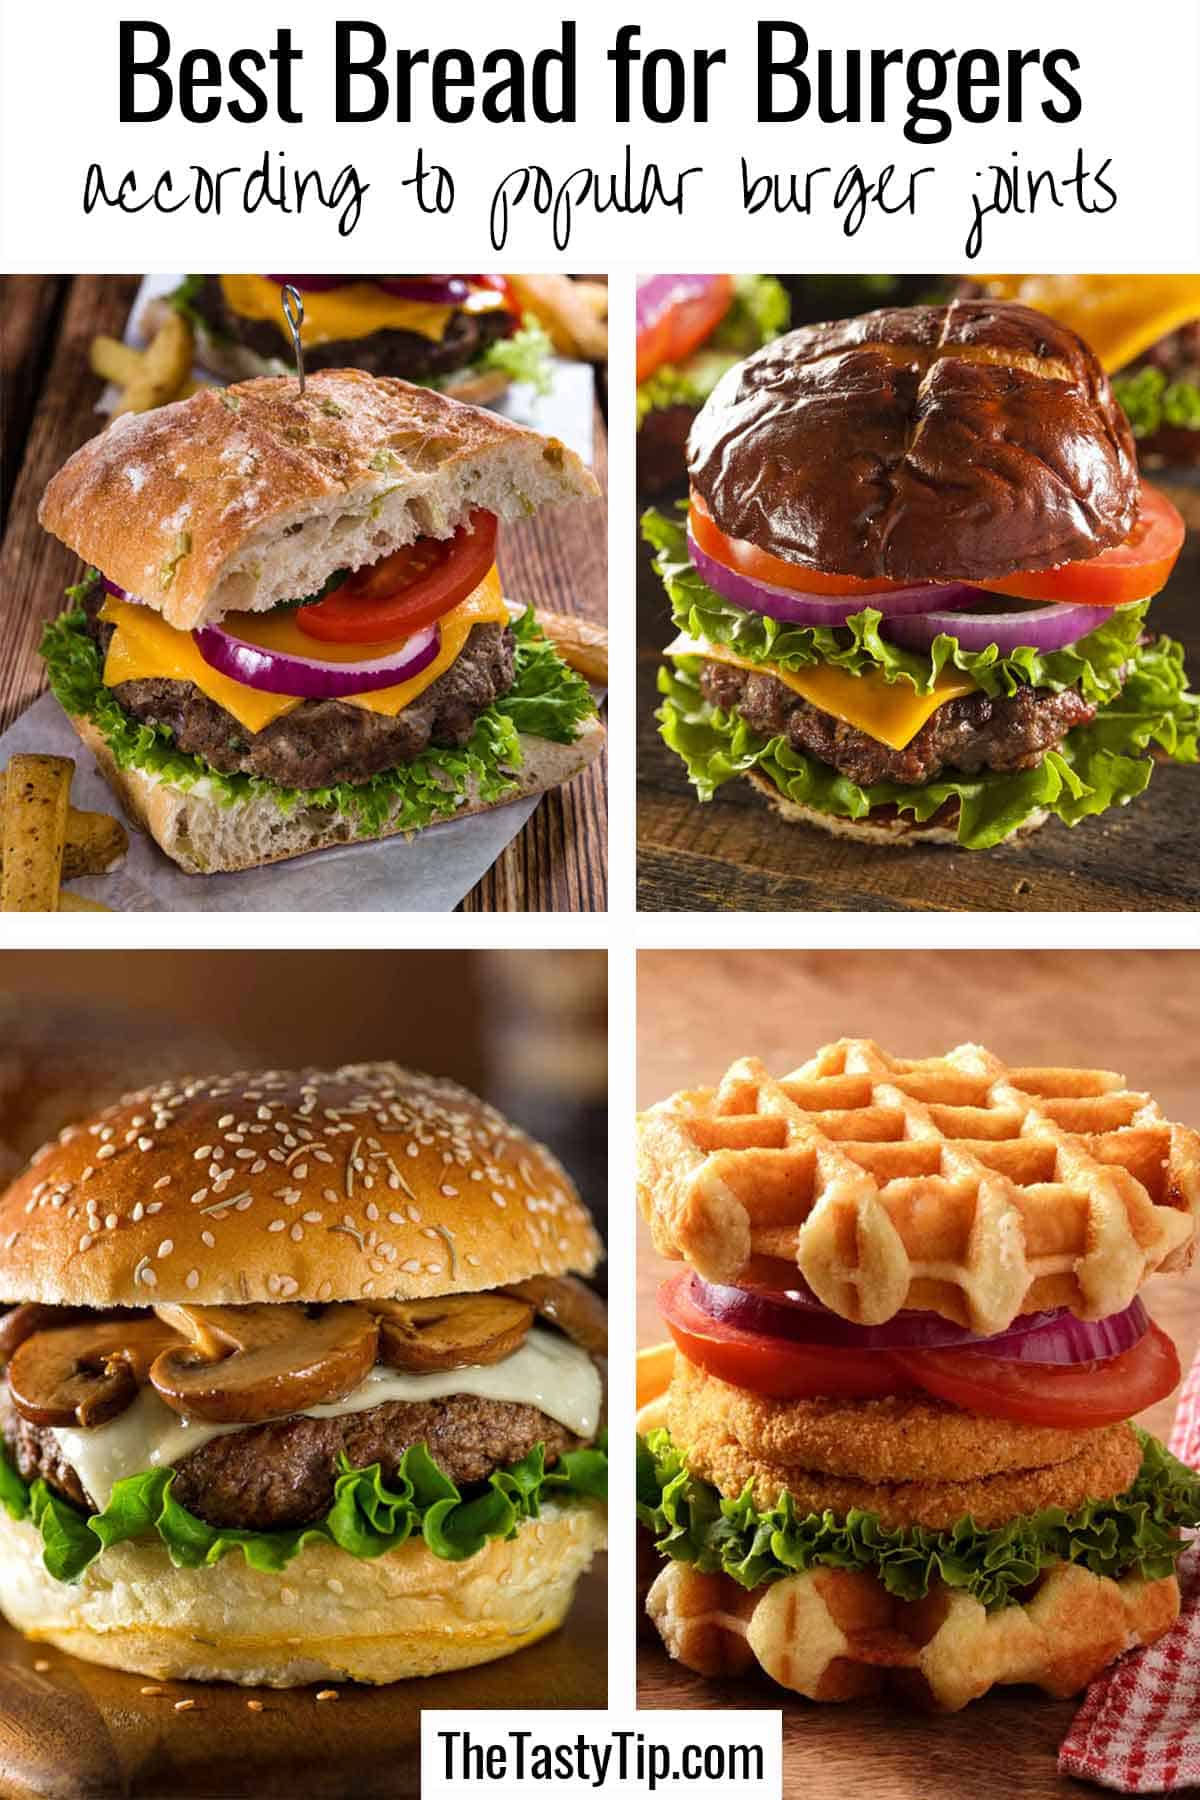 Images of 4 different burgers with different buns.